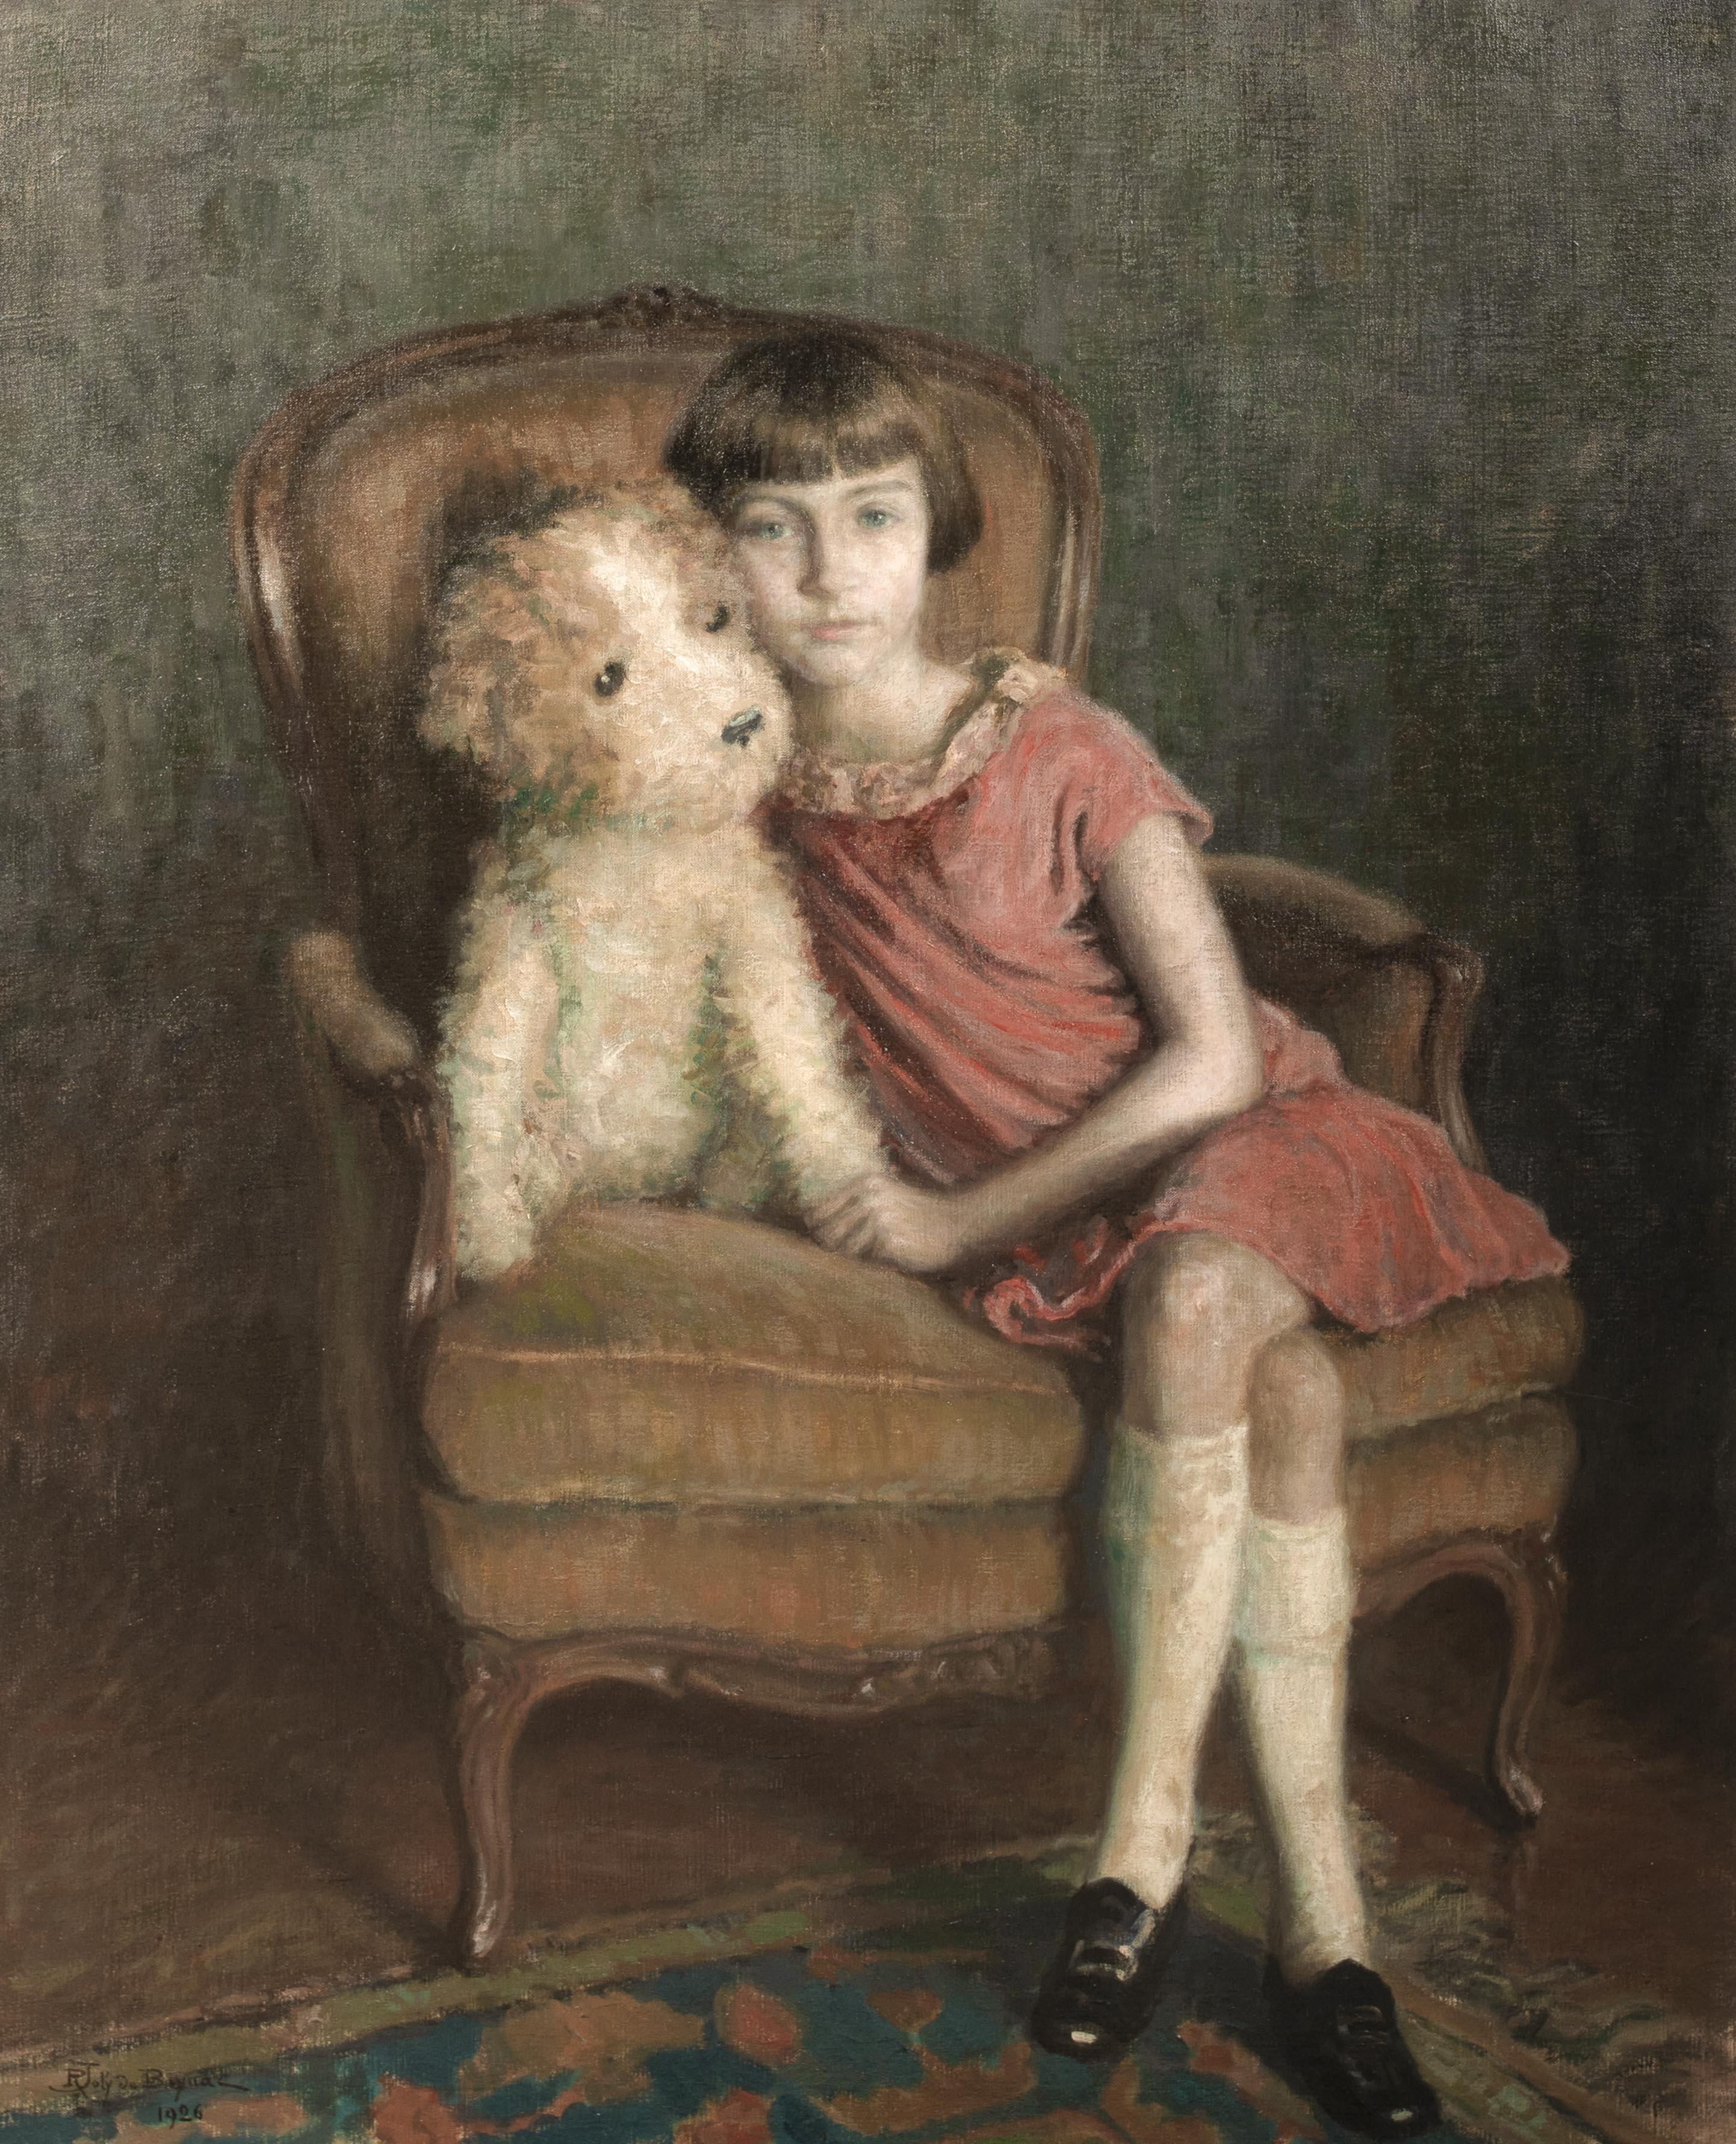 Portrait of A Girl & Toy Bear, dated 1926 

by RENE MARIE JOLY DE BEYNAC (1876-1978)

Large 1926 French portrait of a young girl and her teddy bear, oil on canvas by Rene Marie Joly De Beynac. Excellent quality and example of the artists work full